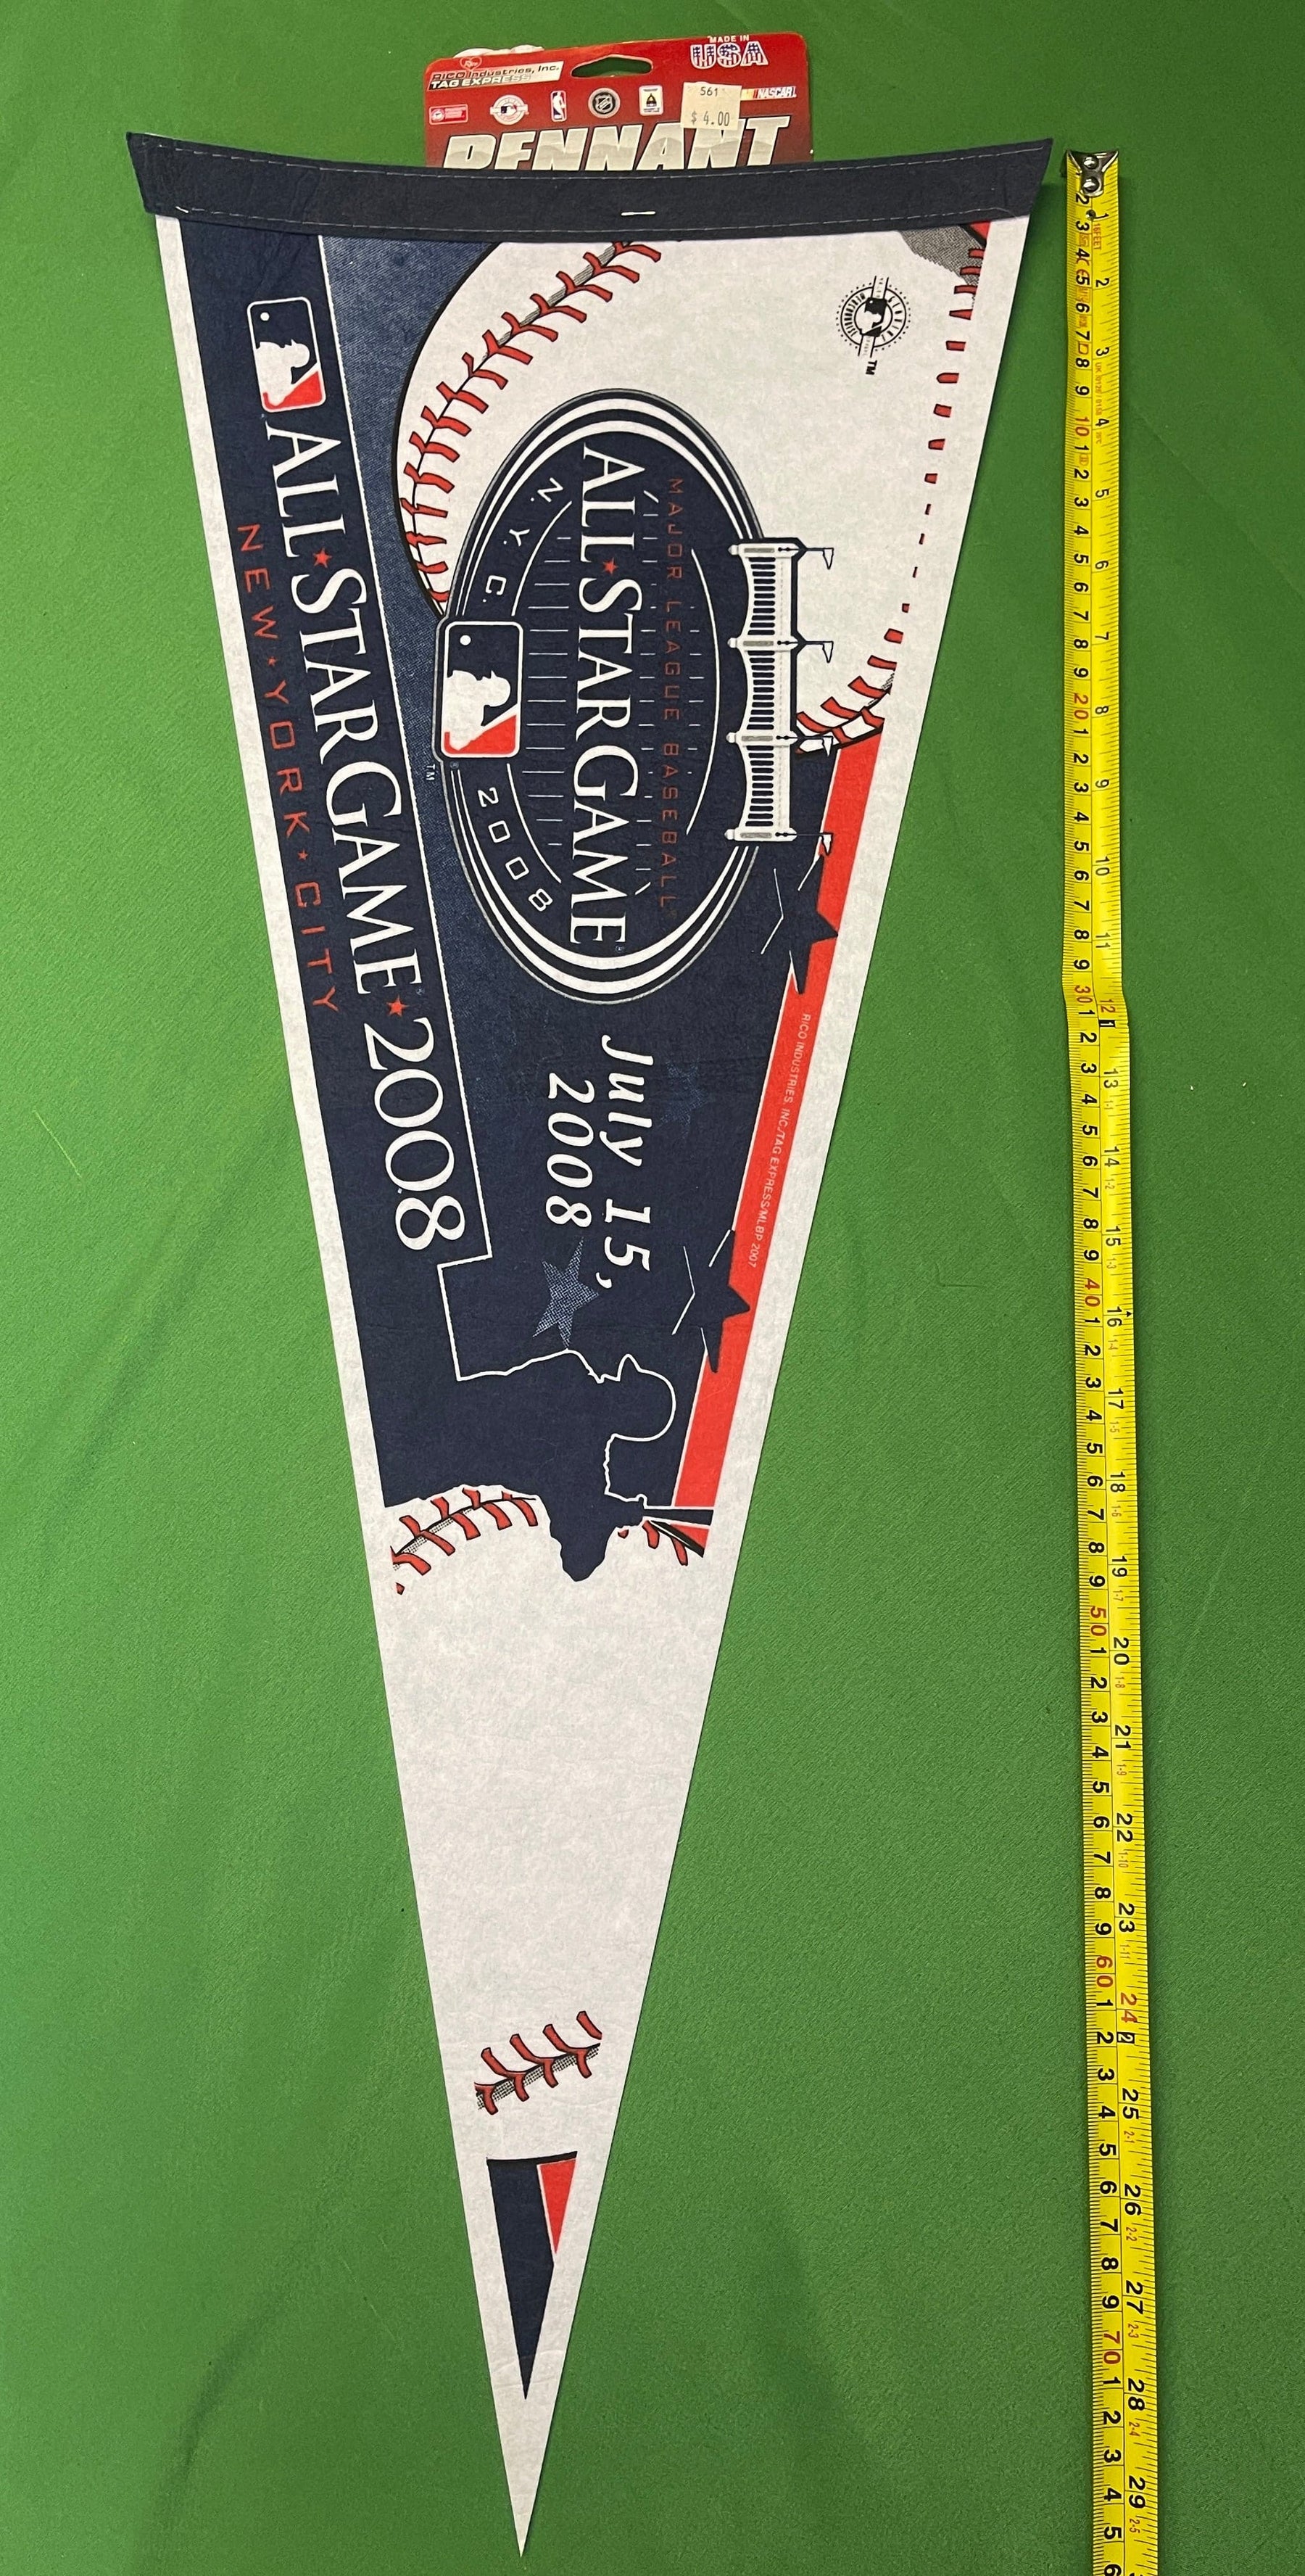 MLB All Star Game NYC 2008 Full-Size Pennant NWT